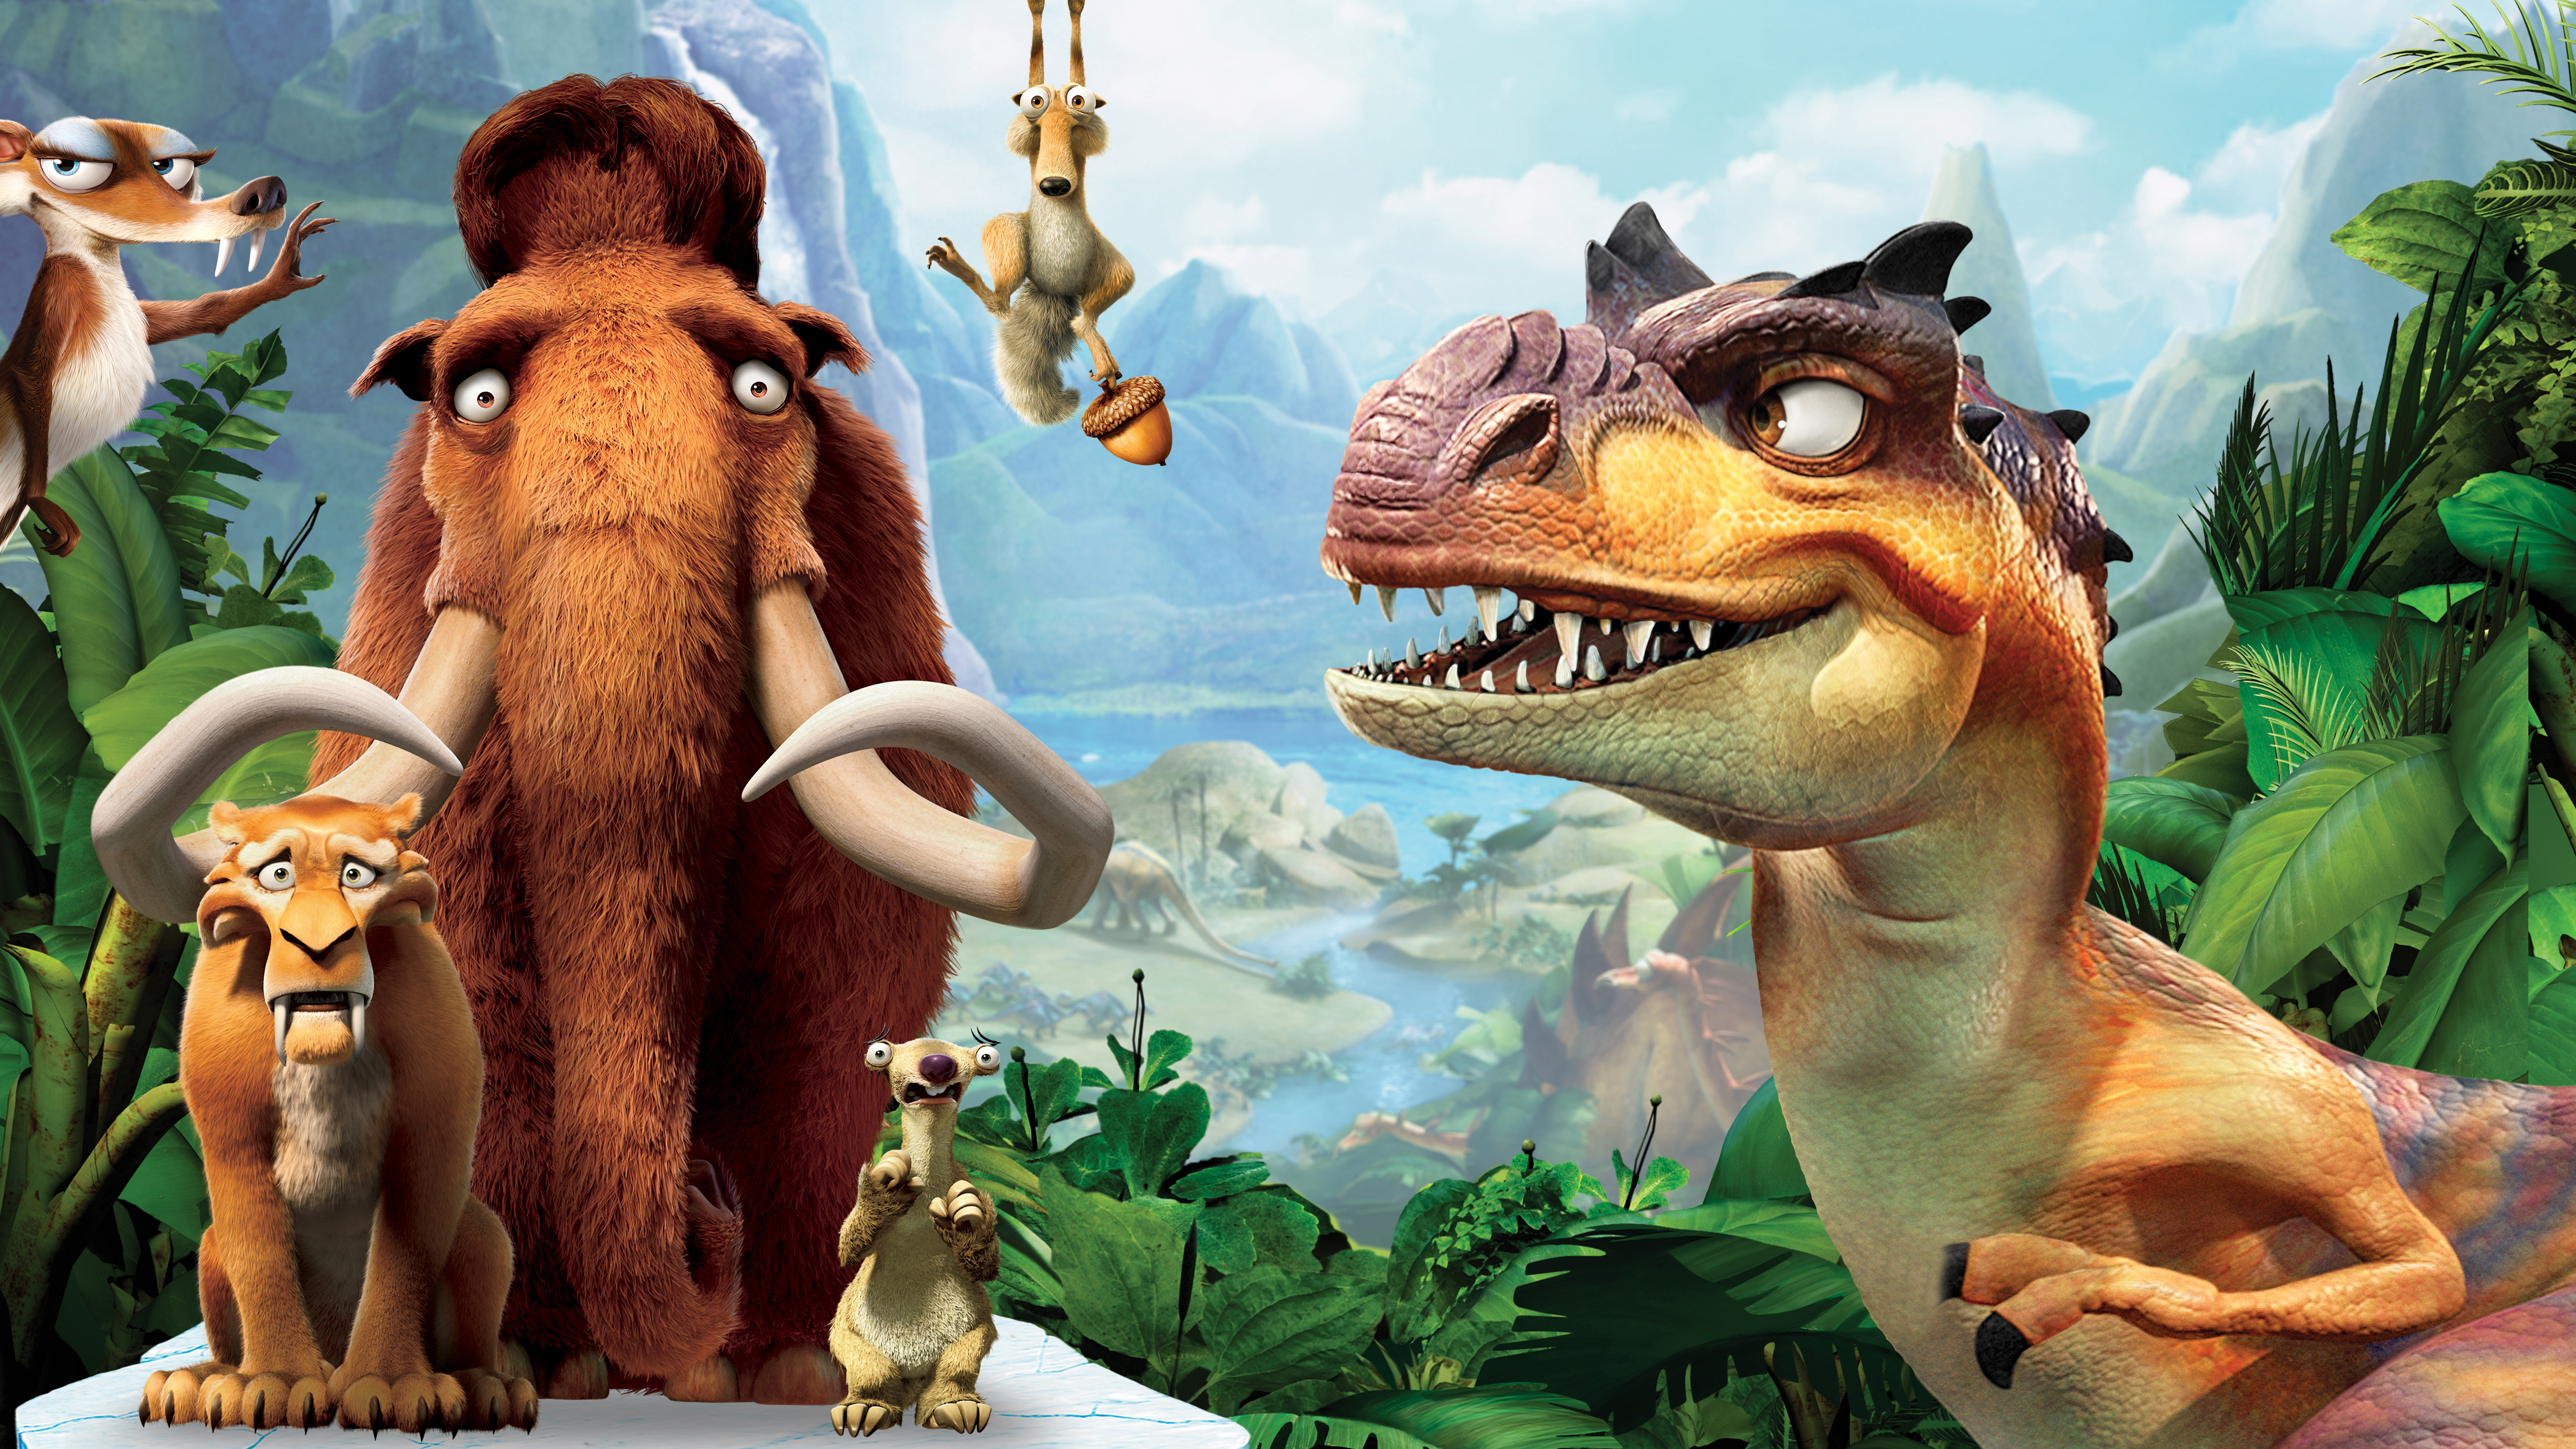 Ice Age: Dawn Of The Dinosaurs 8k Ultra HD Wallpaper